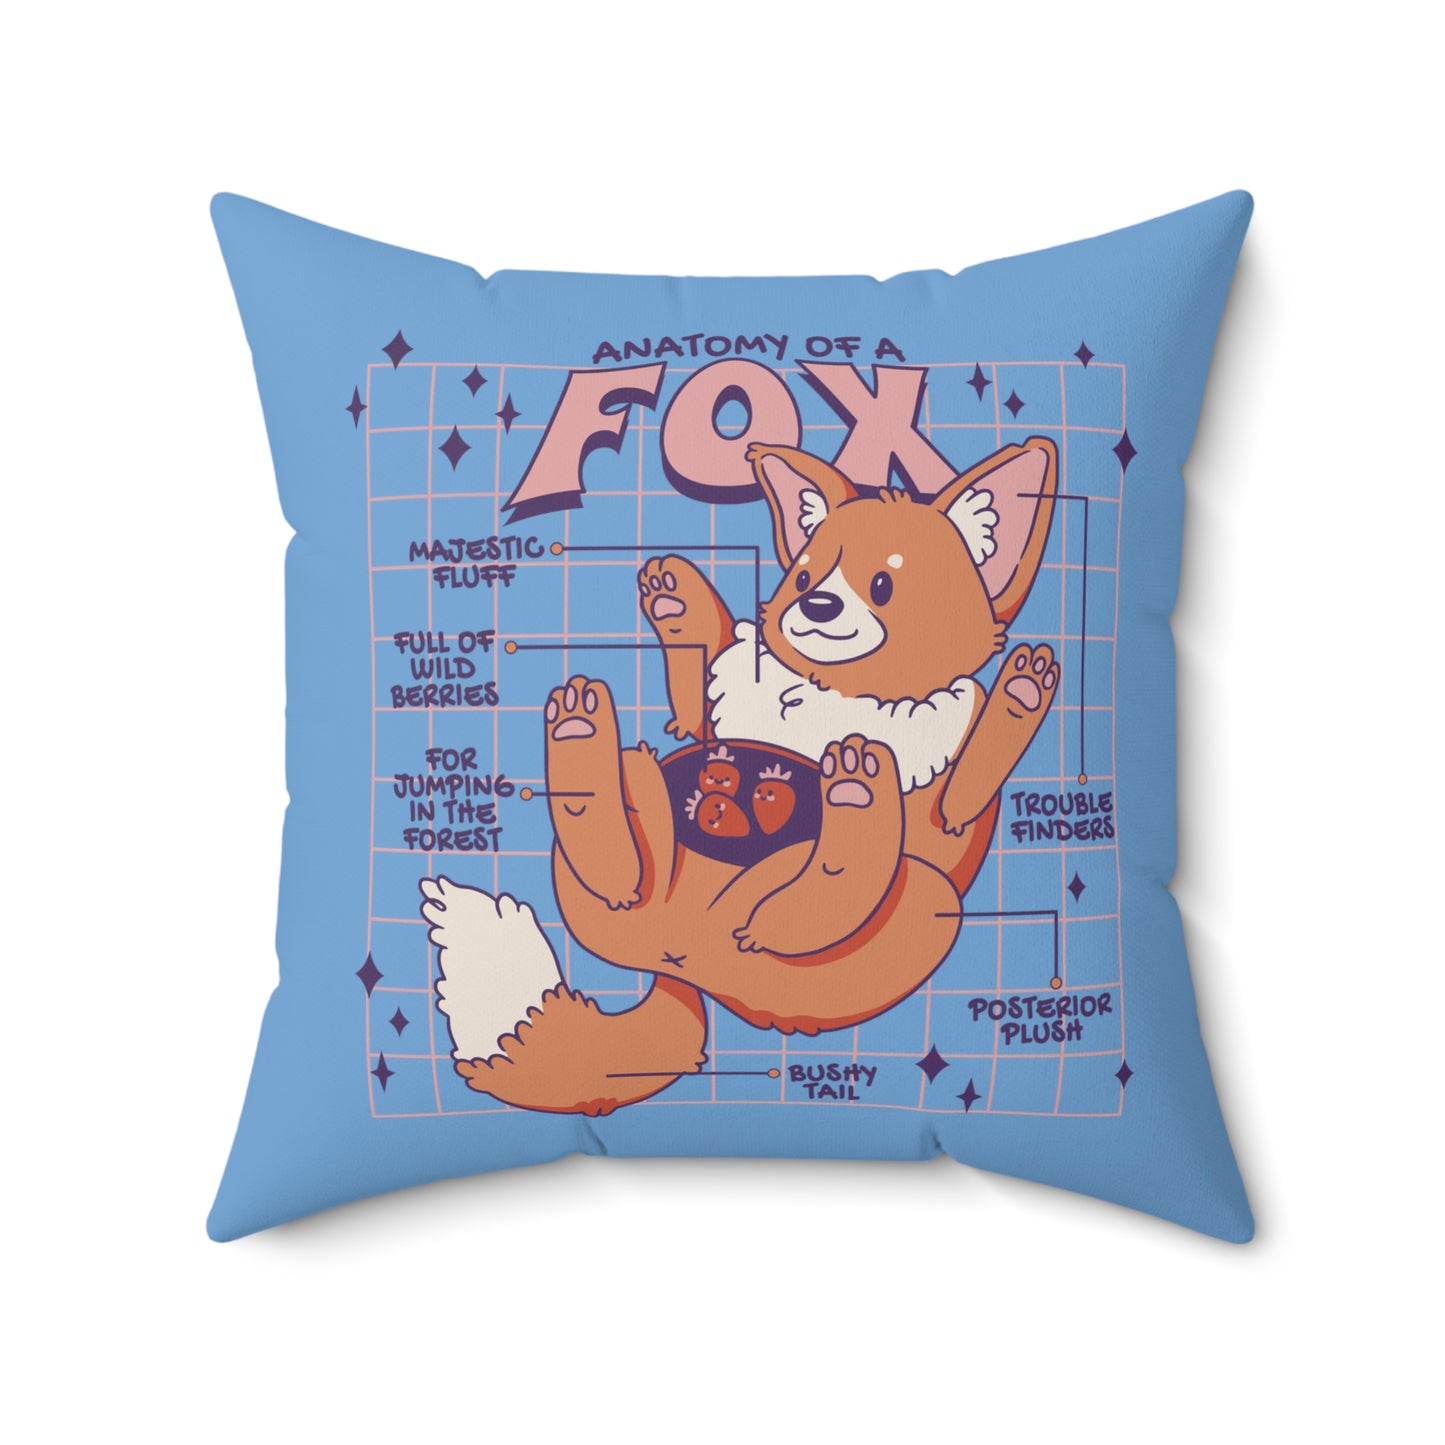 Anatomy of a cute fox Square Pillow